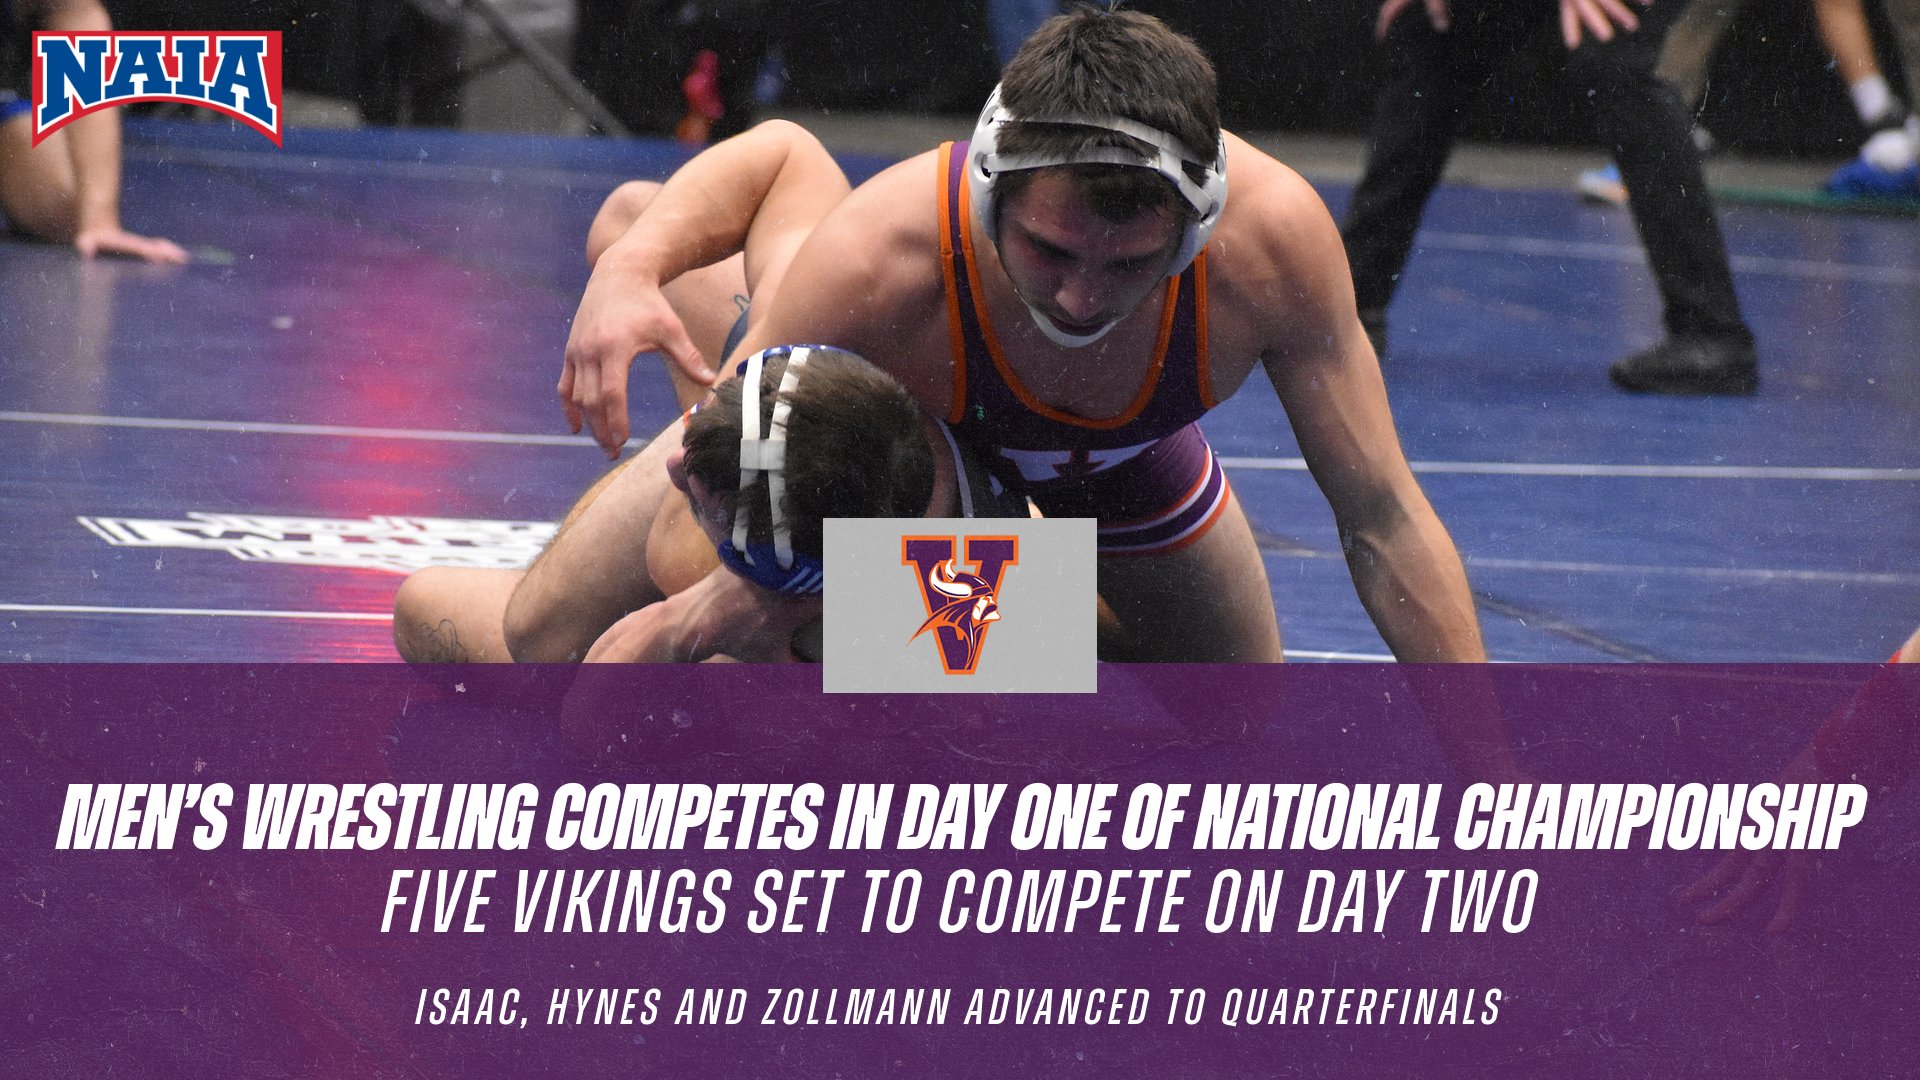 Men's Wrestling Competes in Day One of National Championship